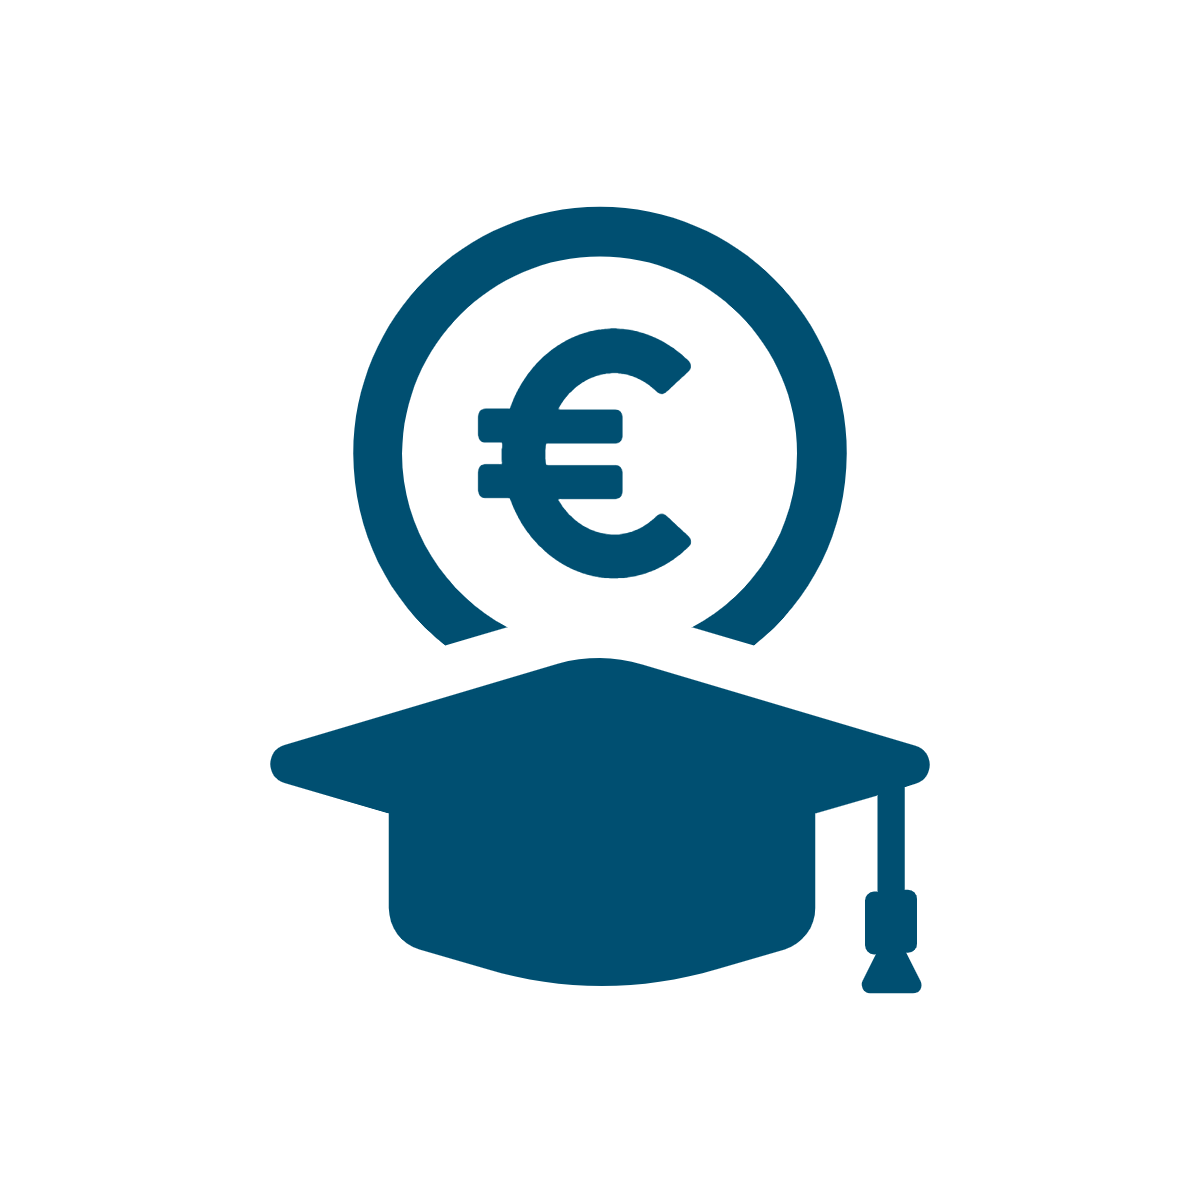 A blue icon of a graduation cap with a money sign above it.